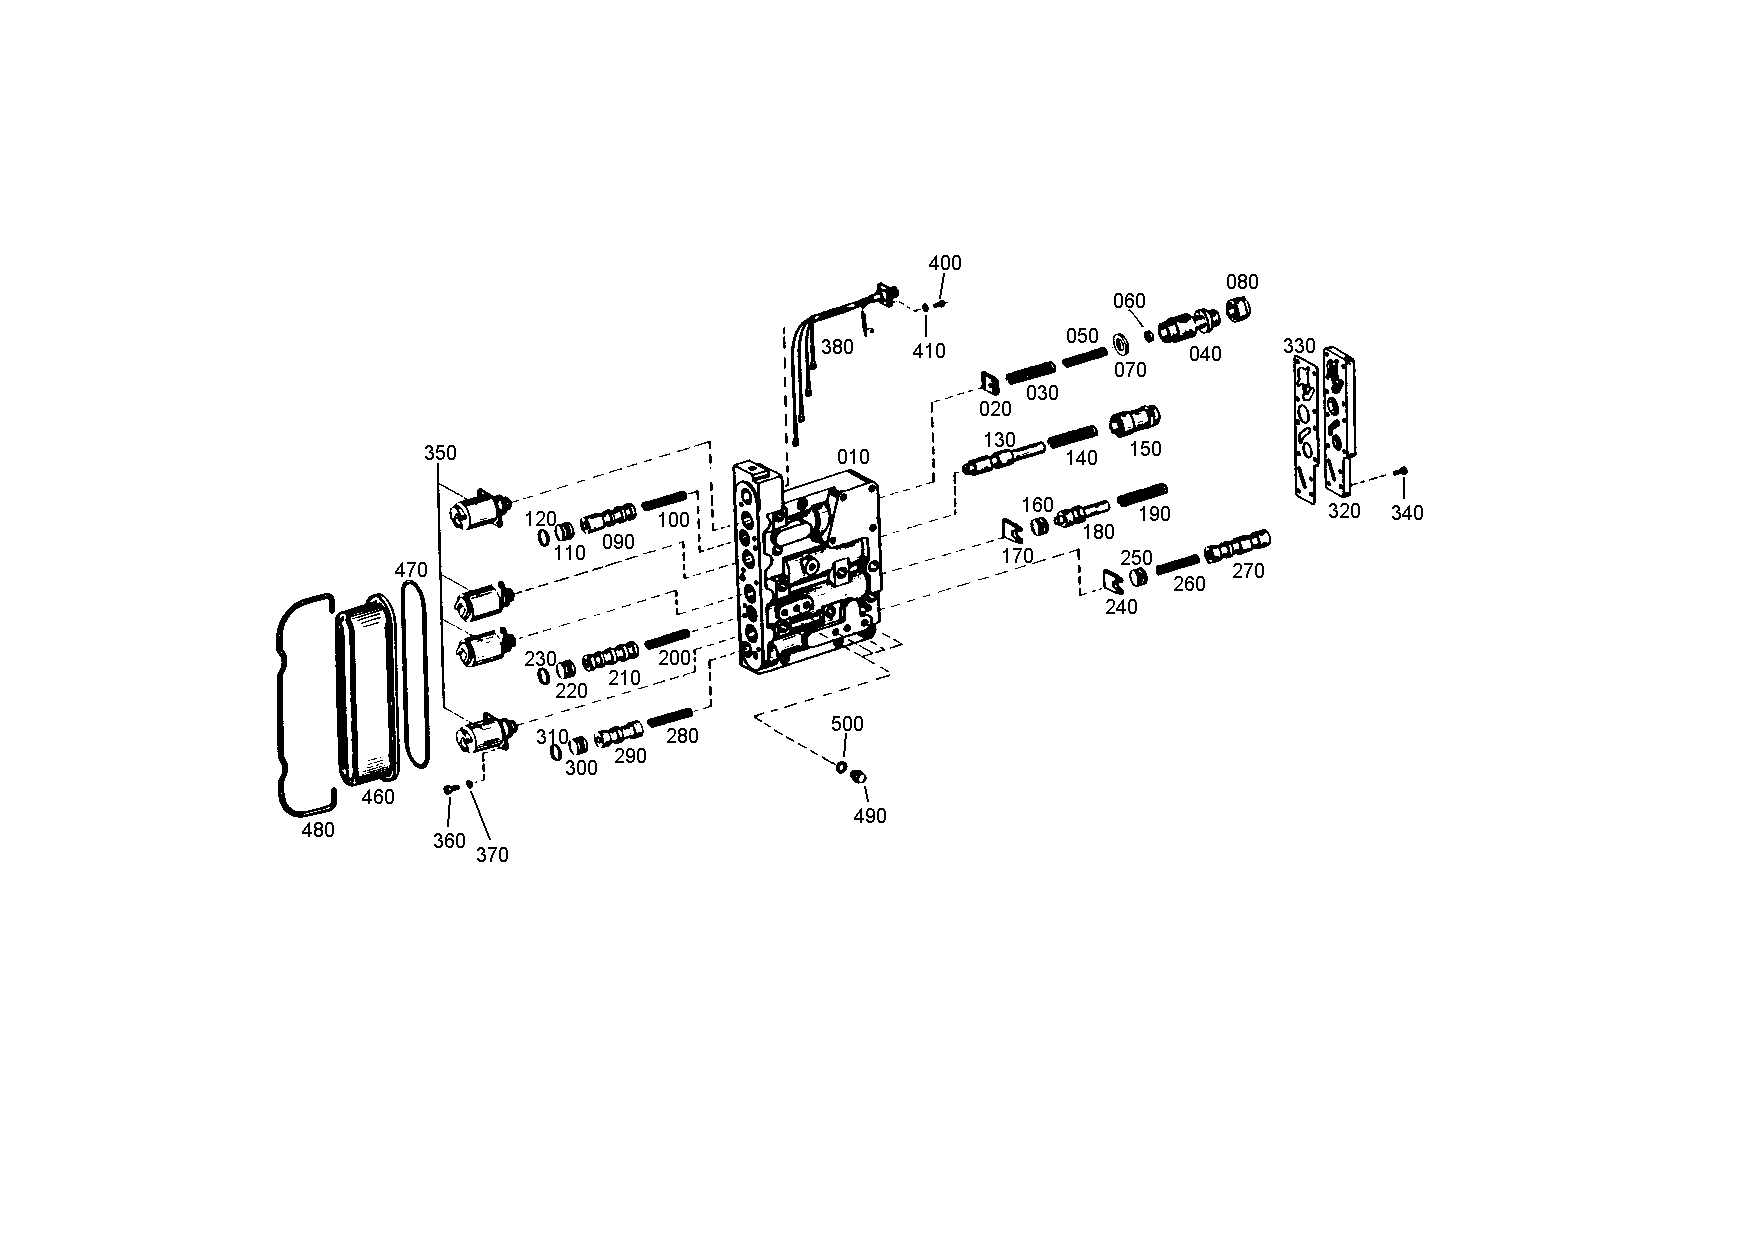 drawing for FAUN 1404337 - SOLENOID VALVE (figure 5)